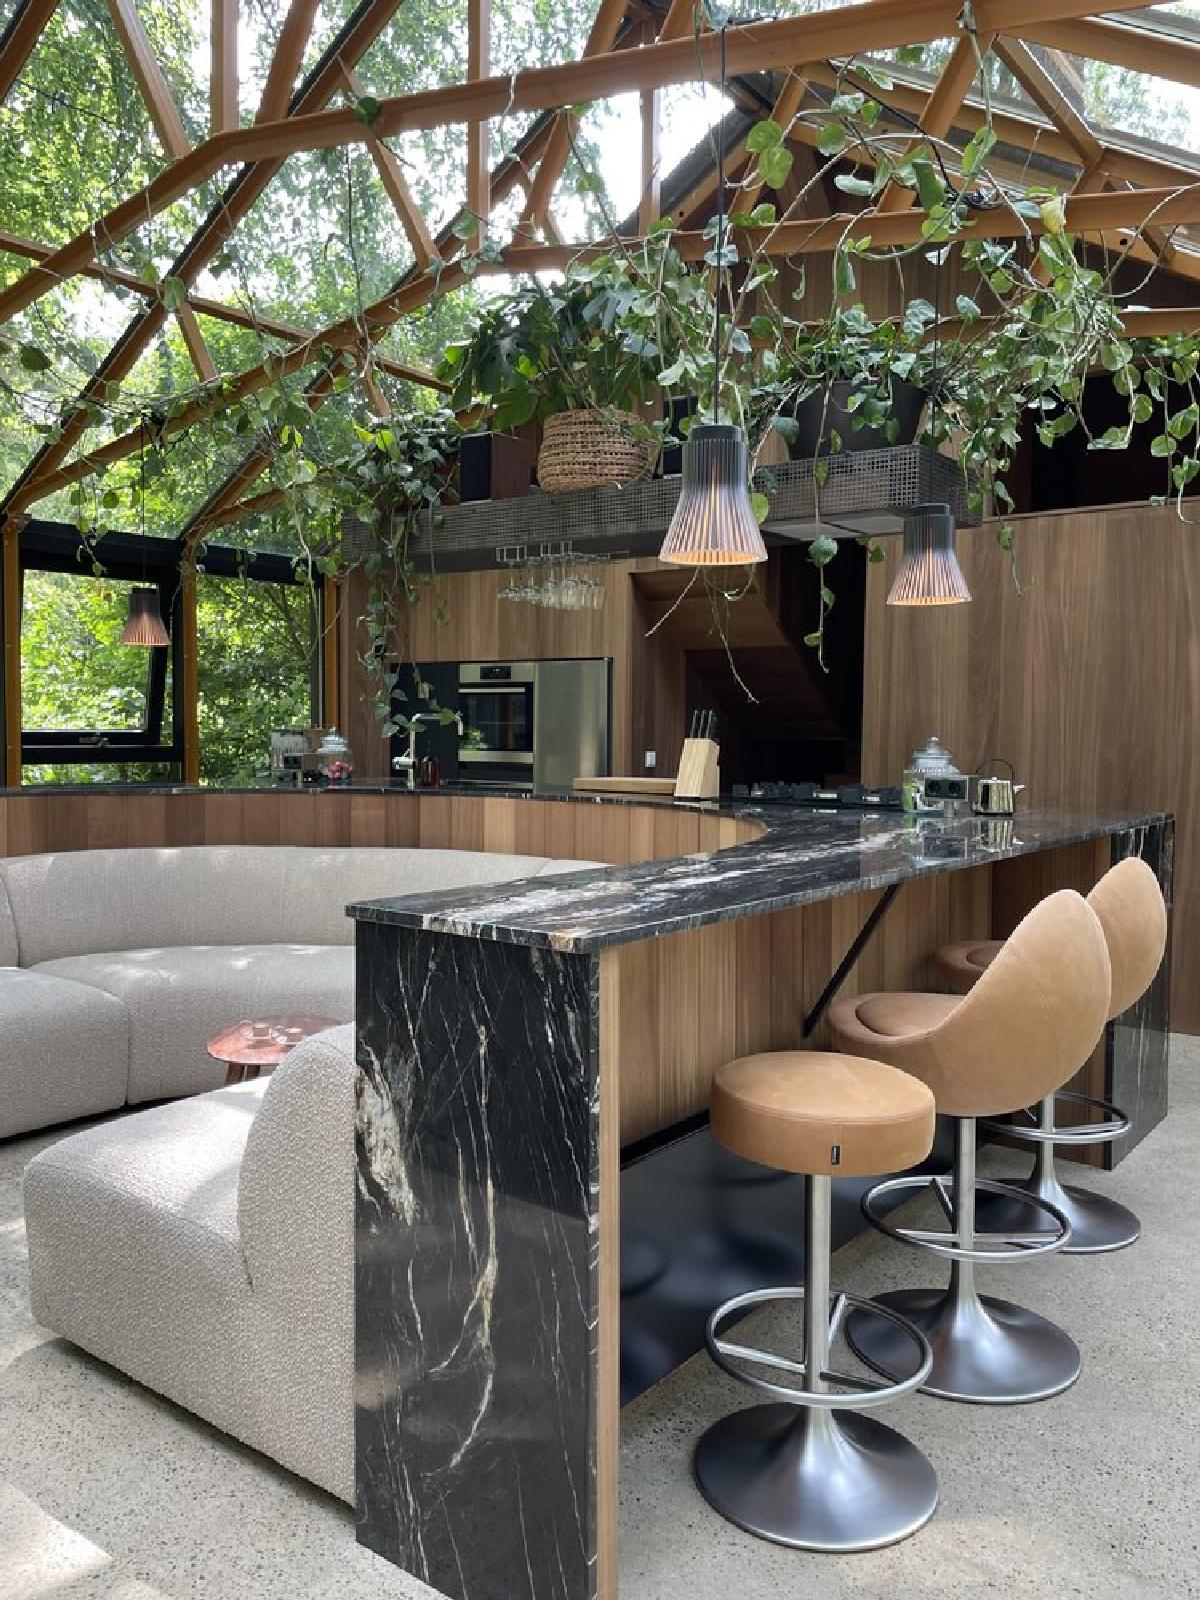 This bar which wraps around the curved couch, is clad in a Belvedere quartzite, and has stools as well as hidden lighting on each side.